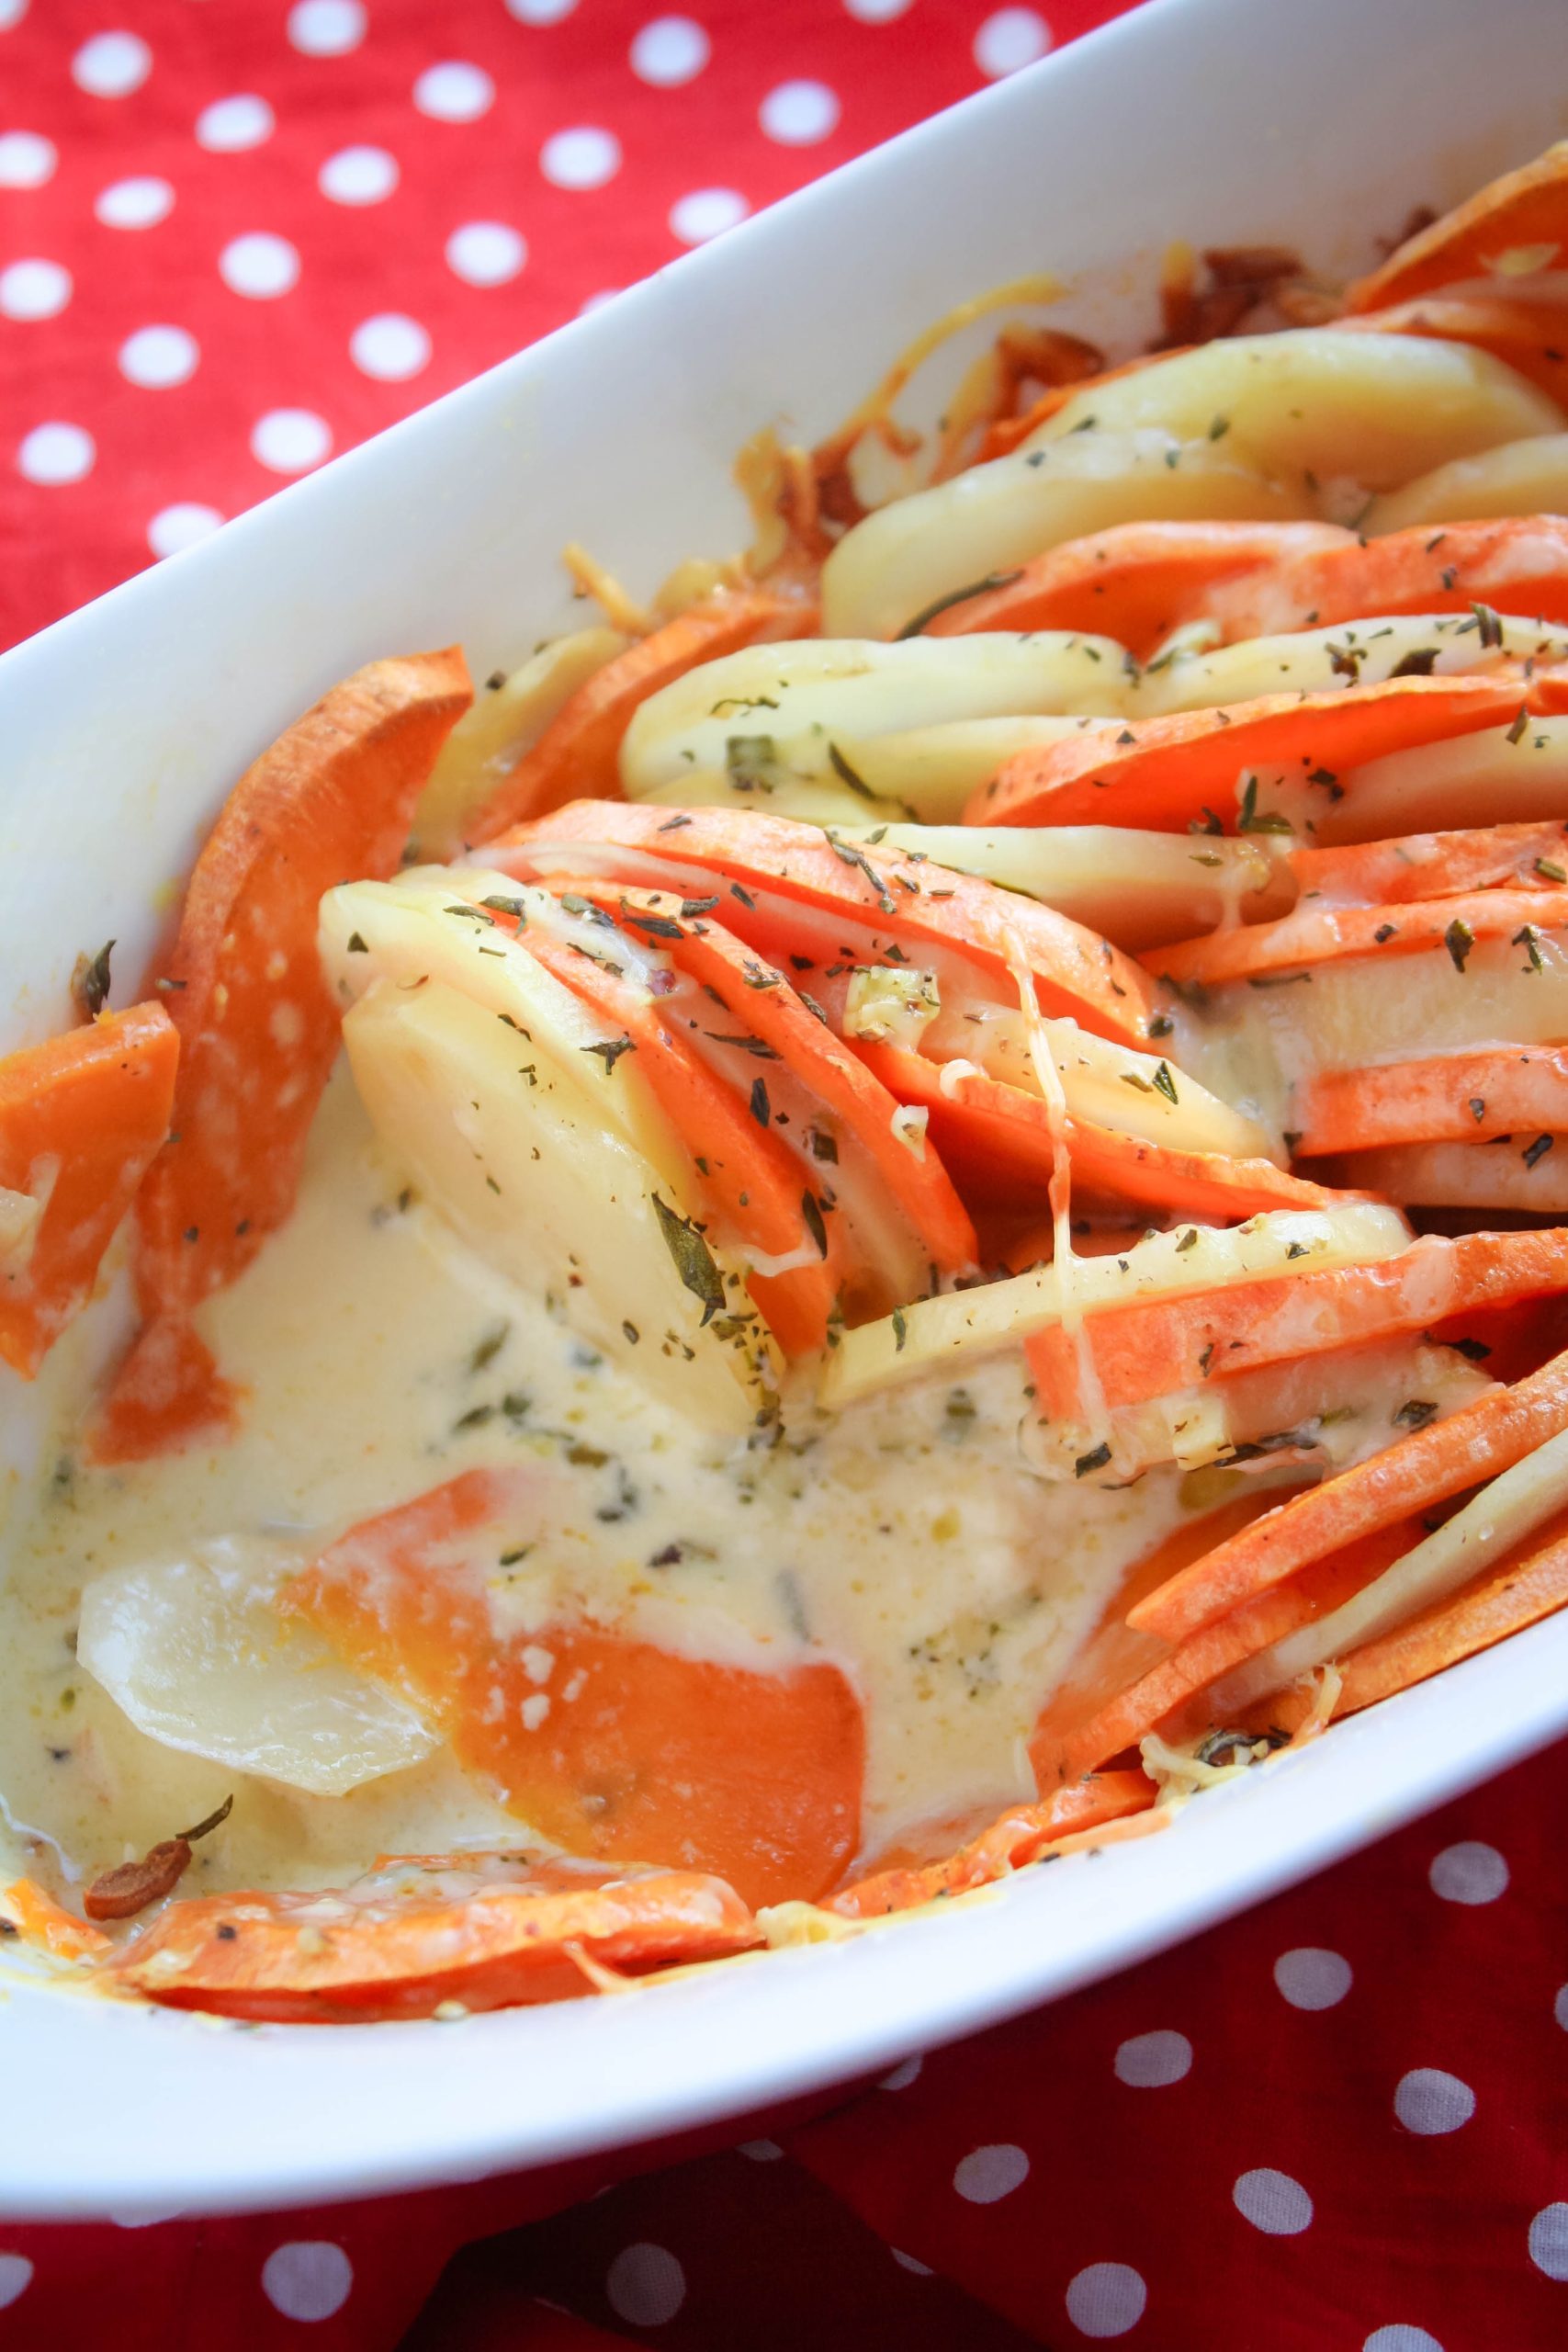 You'll love these creamy Scalloped Yukon Gold and Sweet Potatoes